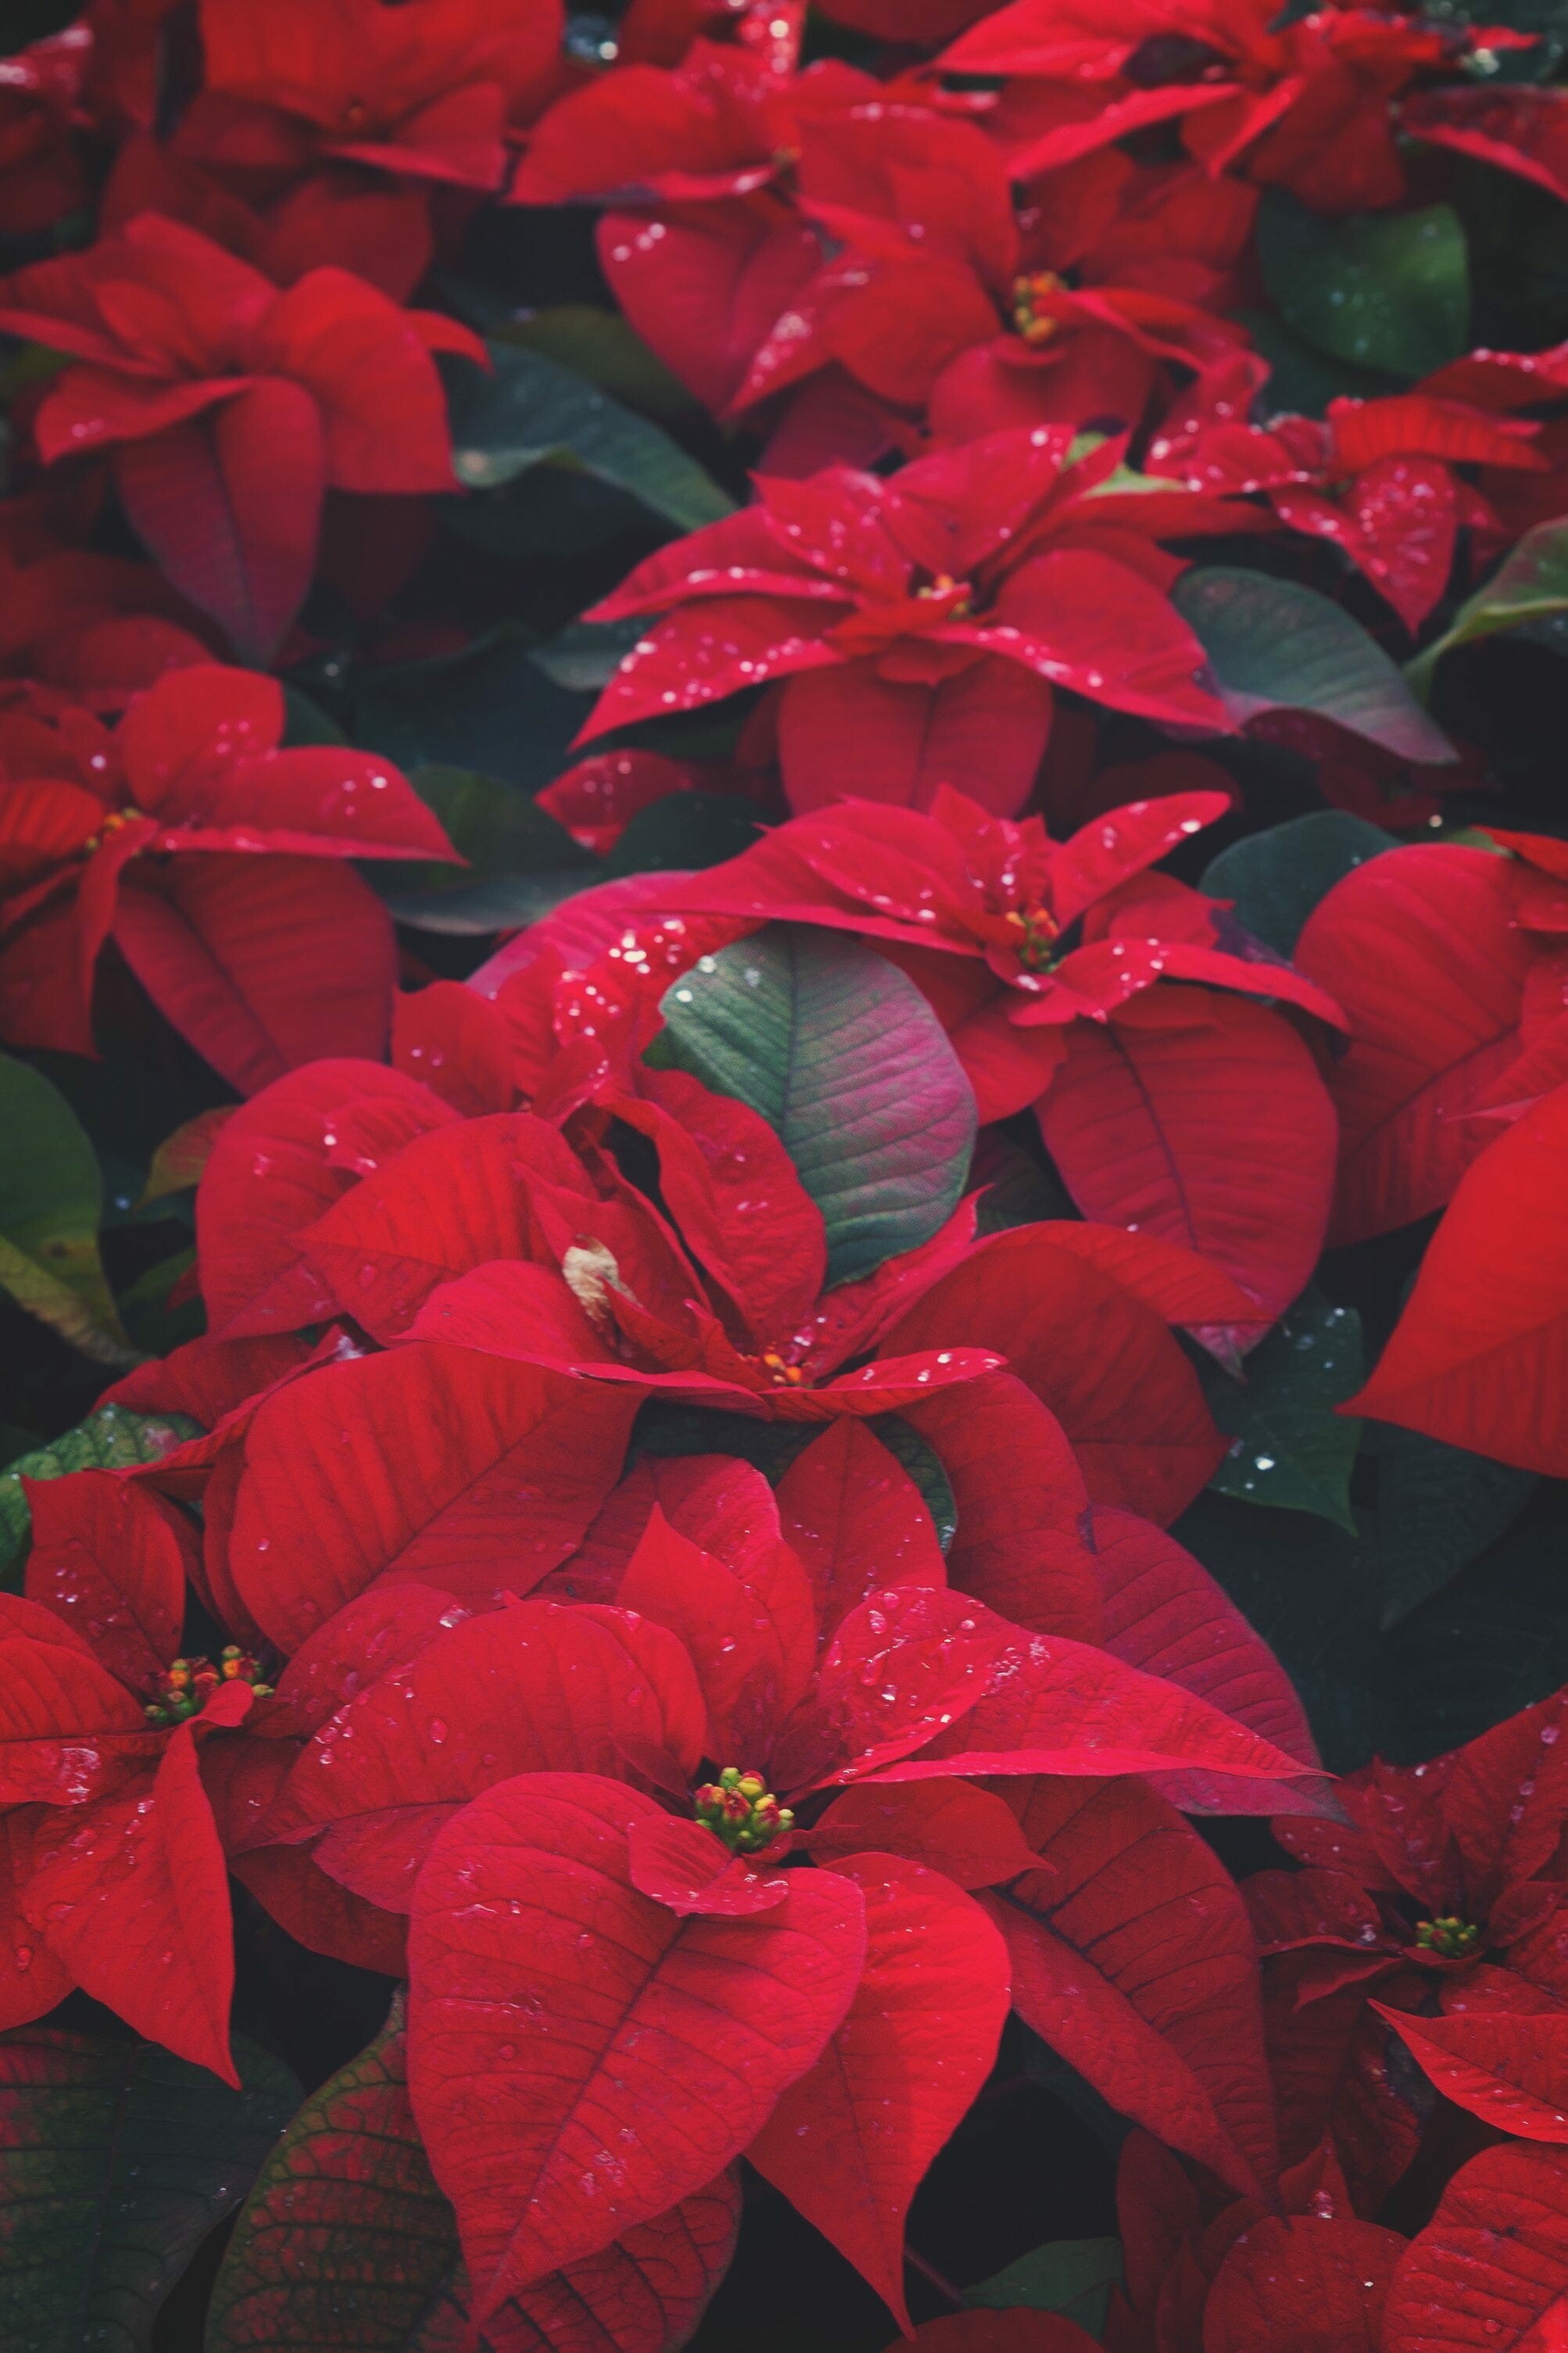 Poinsettia: Blooming indoor plants, Well known for its red and green foliage. 2010x3010 HD Wallpaper.